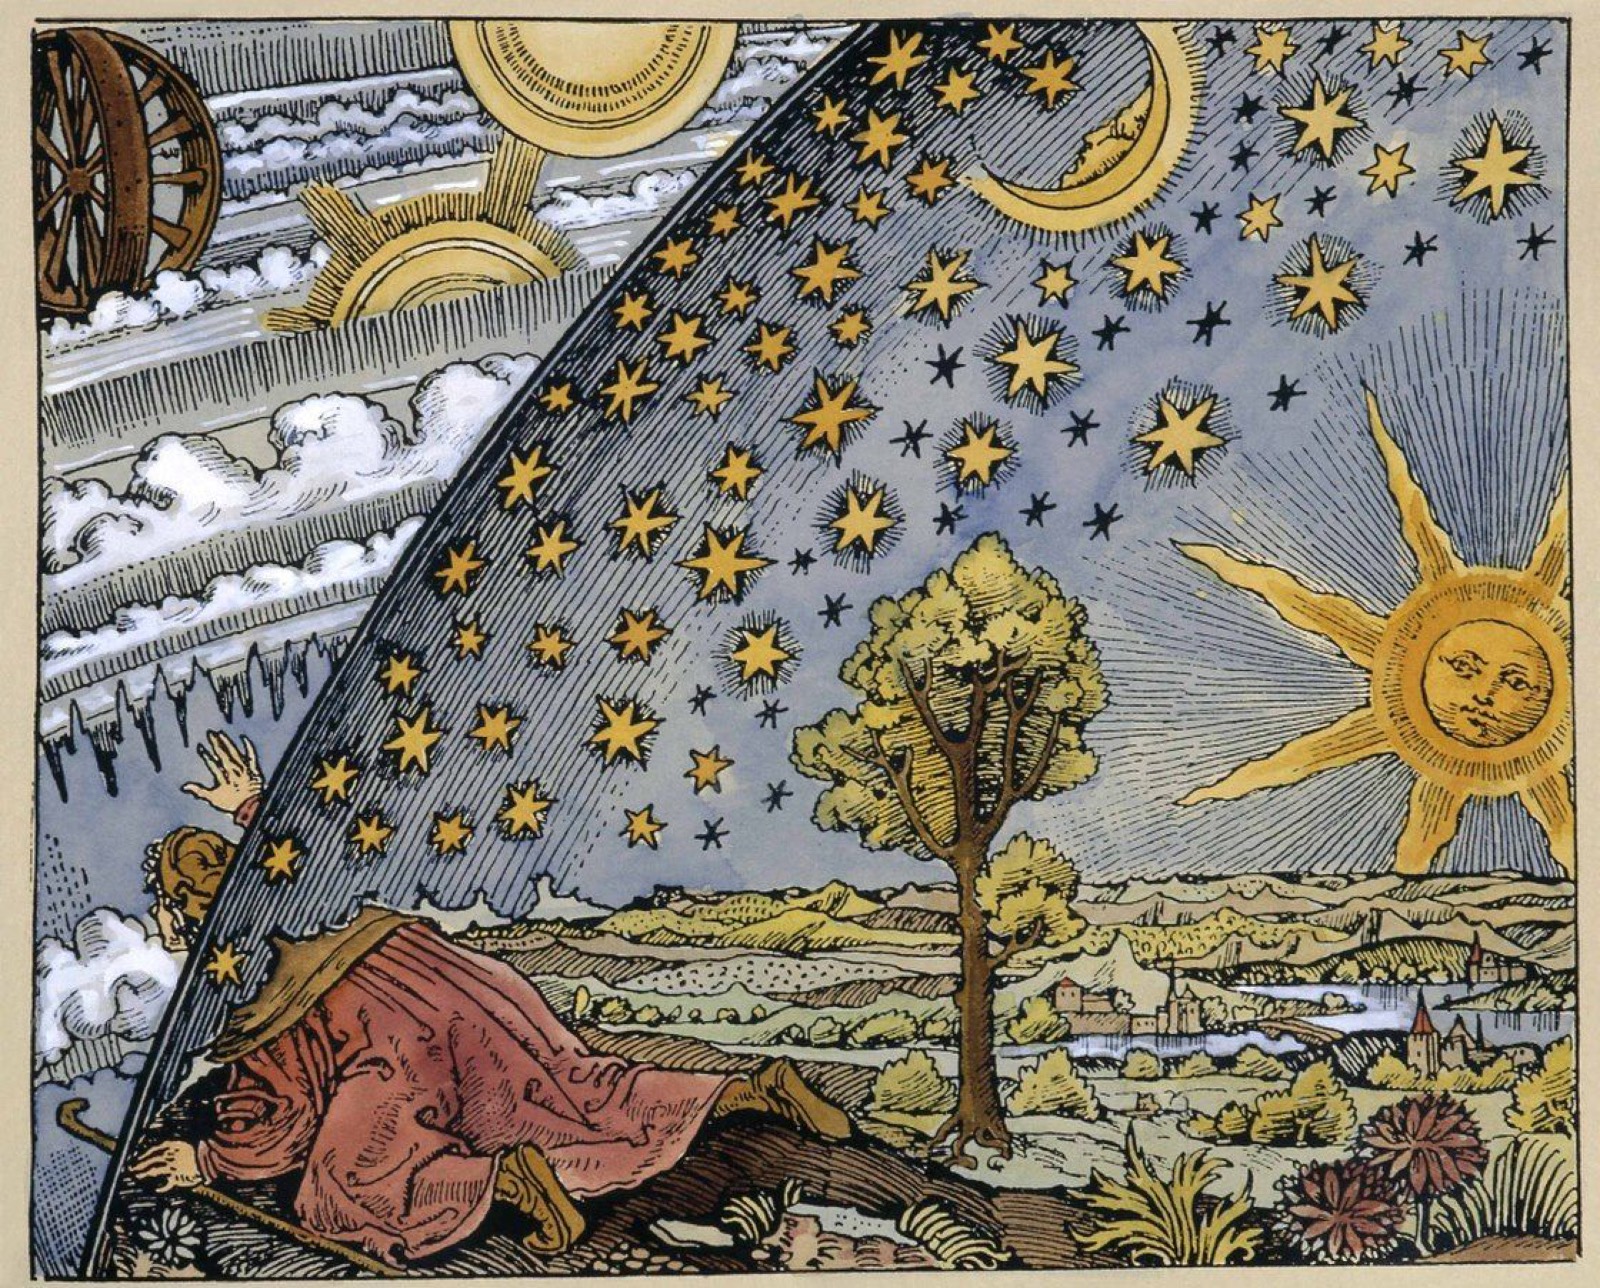 Limited Scientistic Hangouts: Giordano Bruno, Cosmos, and the Alchemical Nature of Science